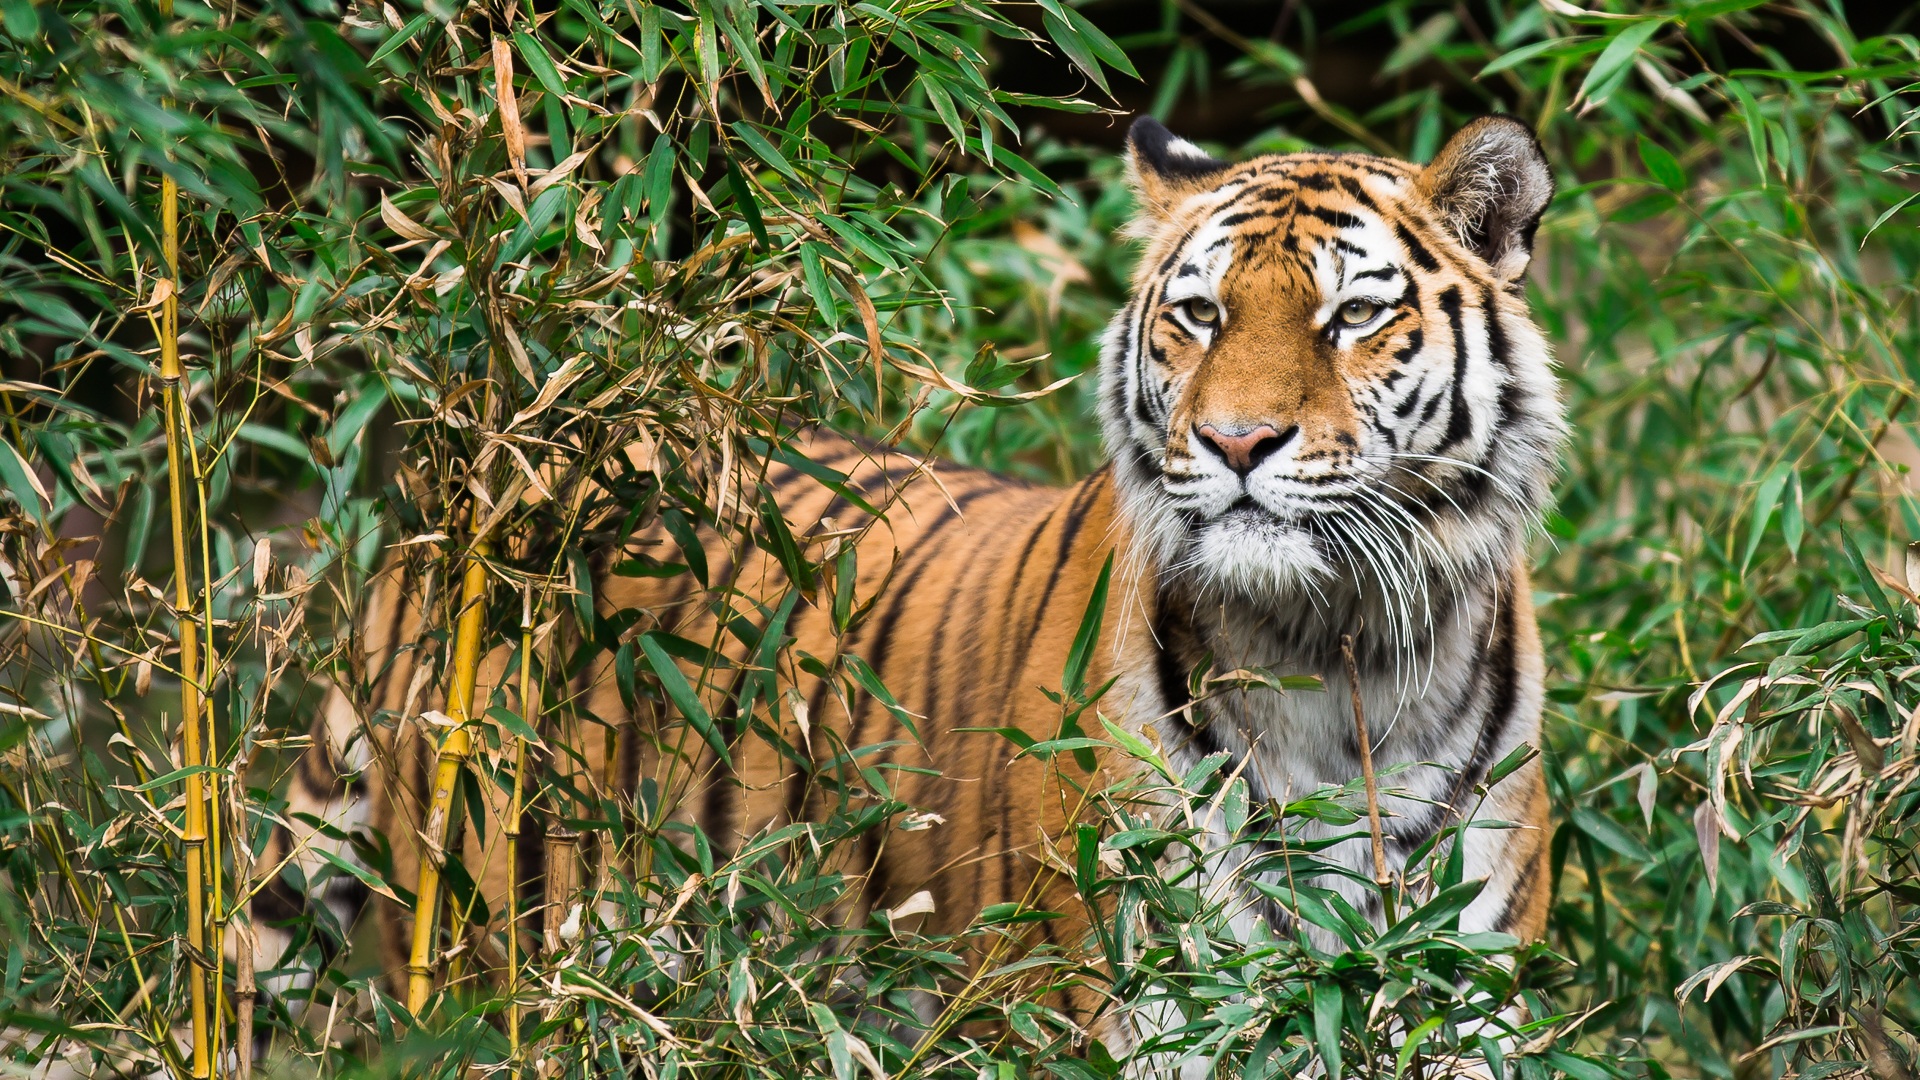 Tiger amongst the Bamboo by Der_Knipser